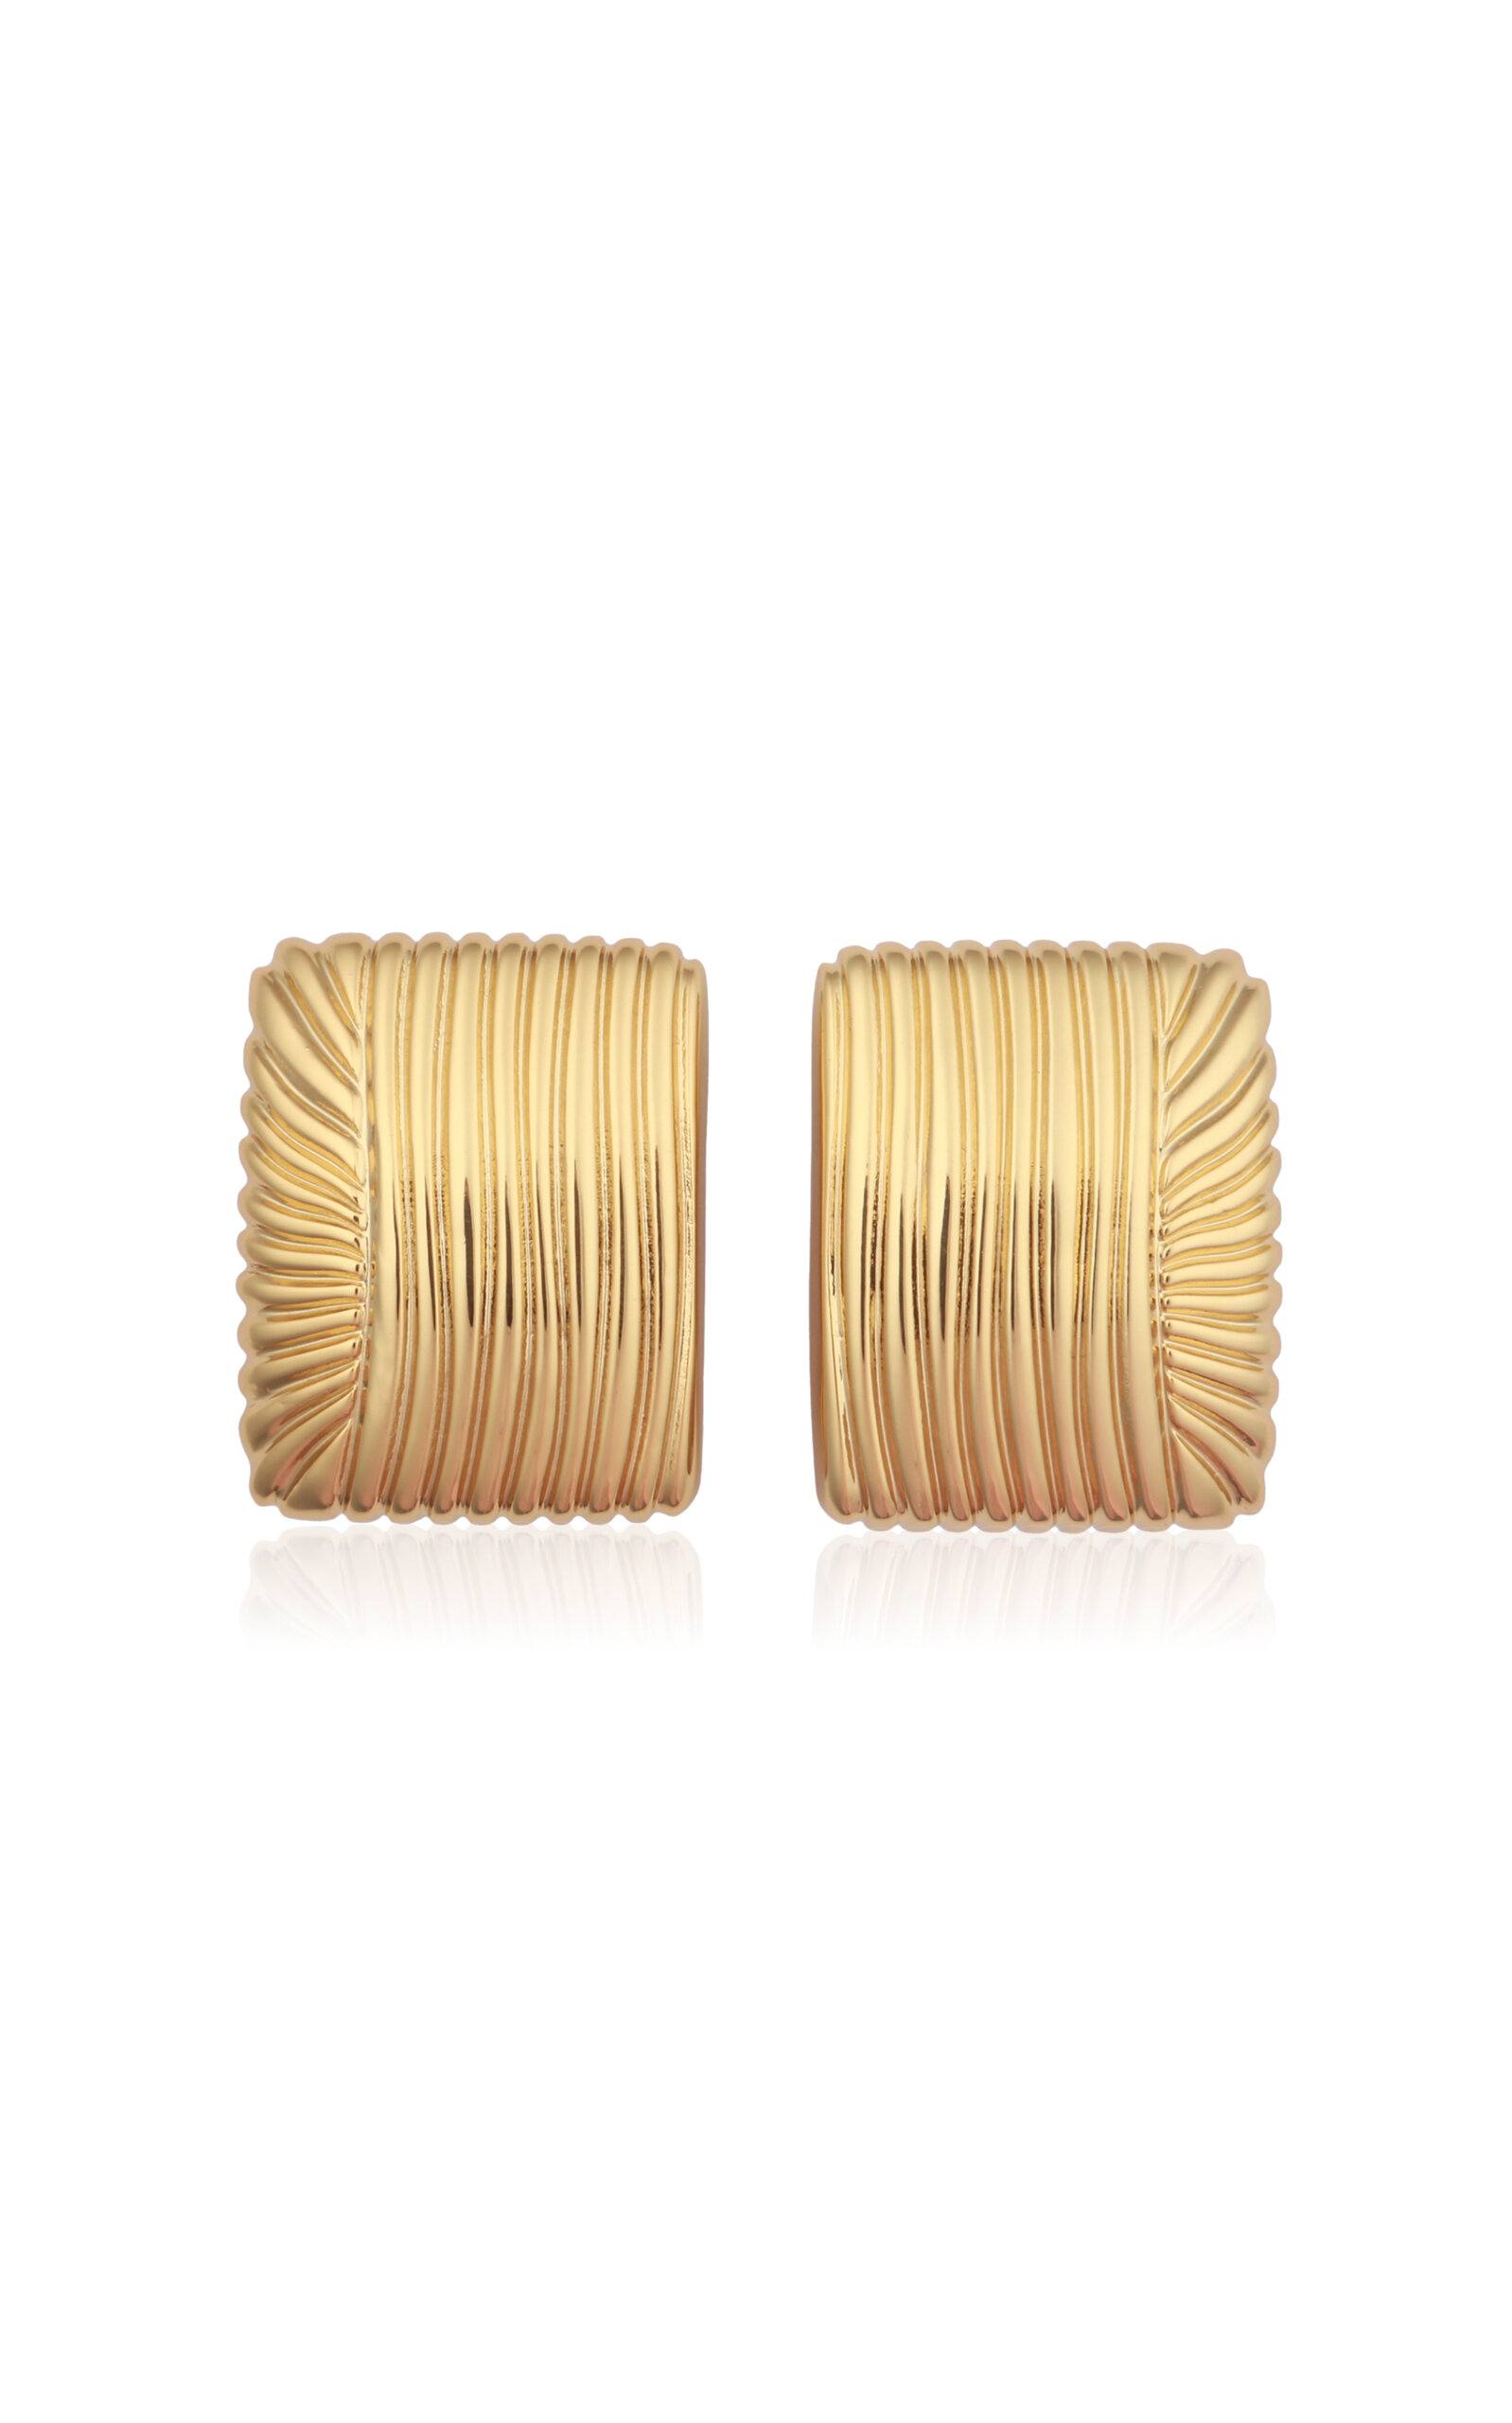 x Cassetto 18k Gold-Plated Earrings